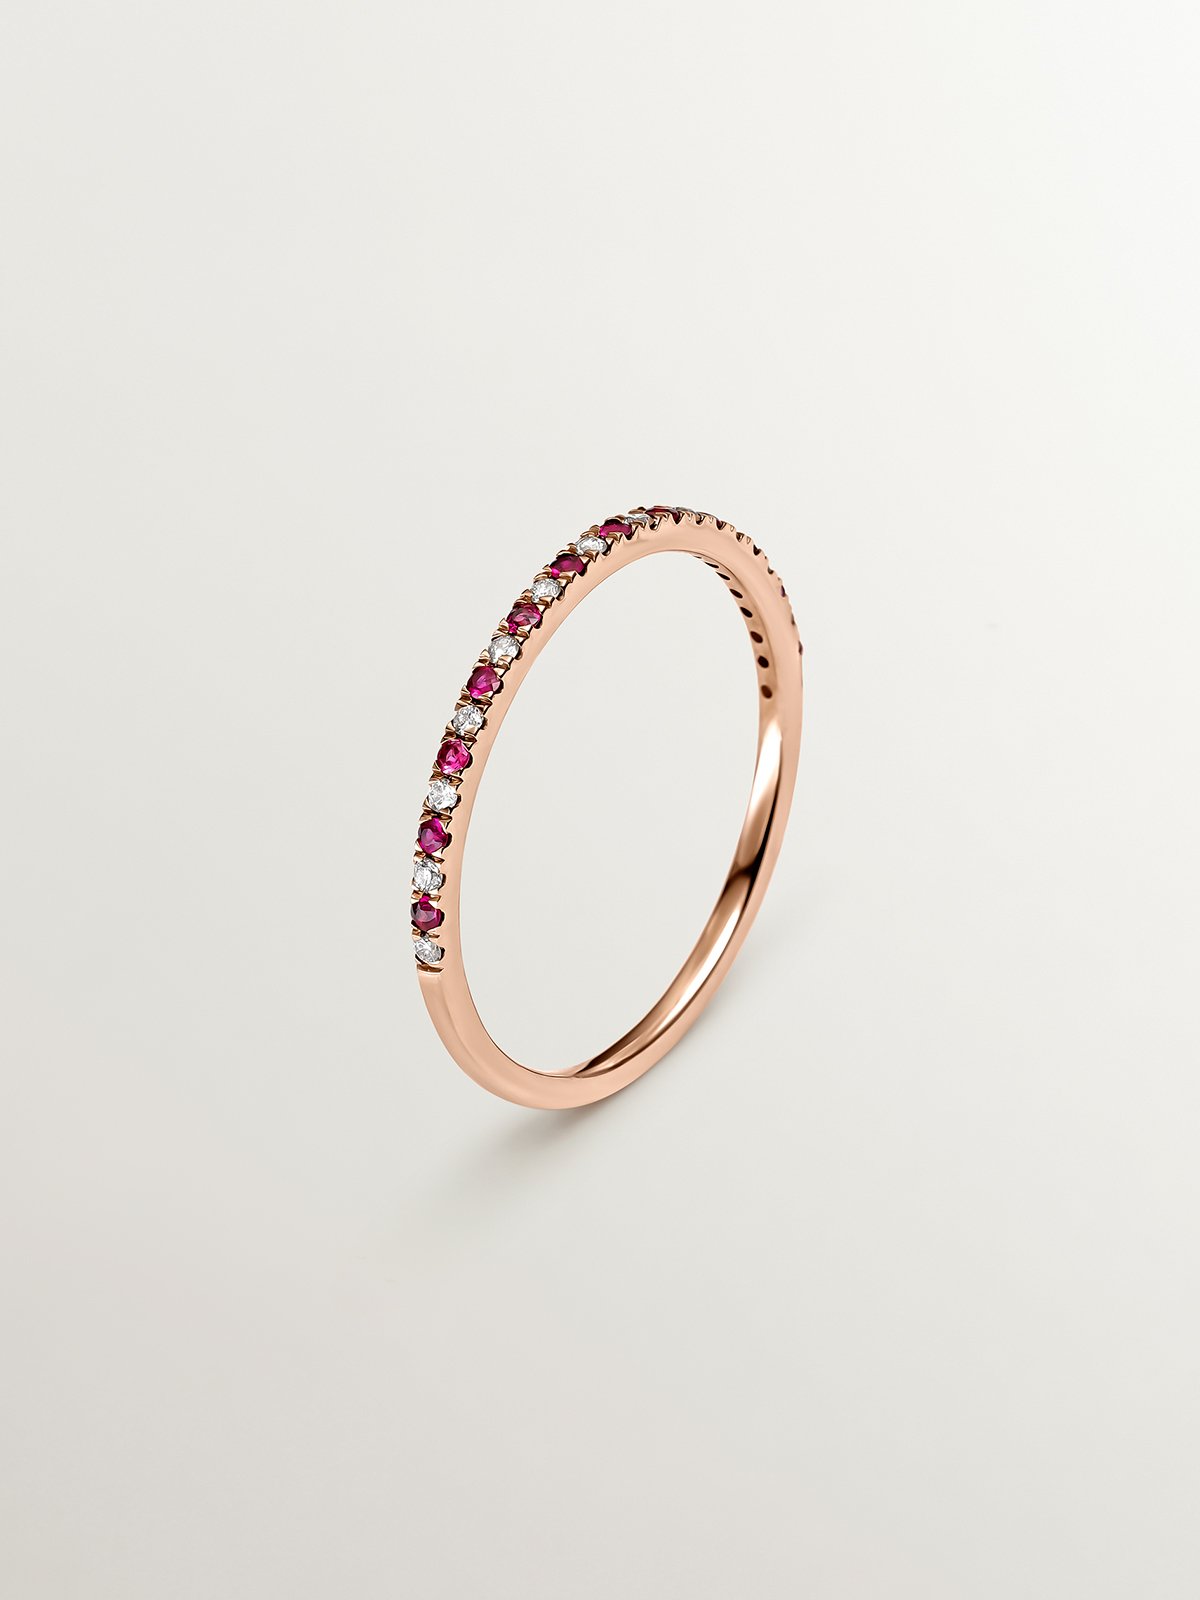 9K Rose Gold Ring with Red Rubies and Diamonds